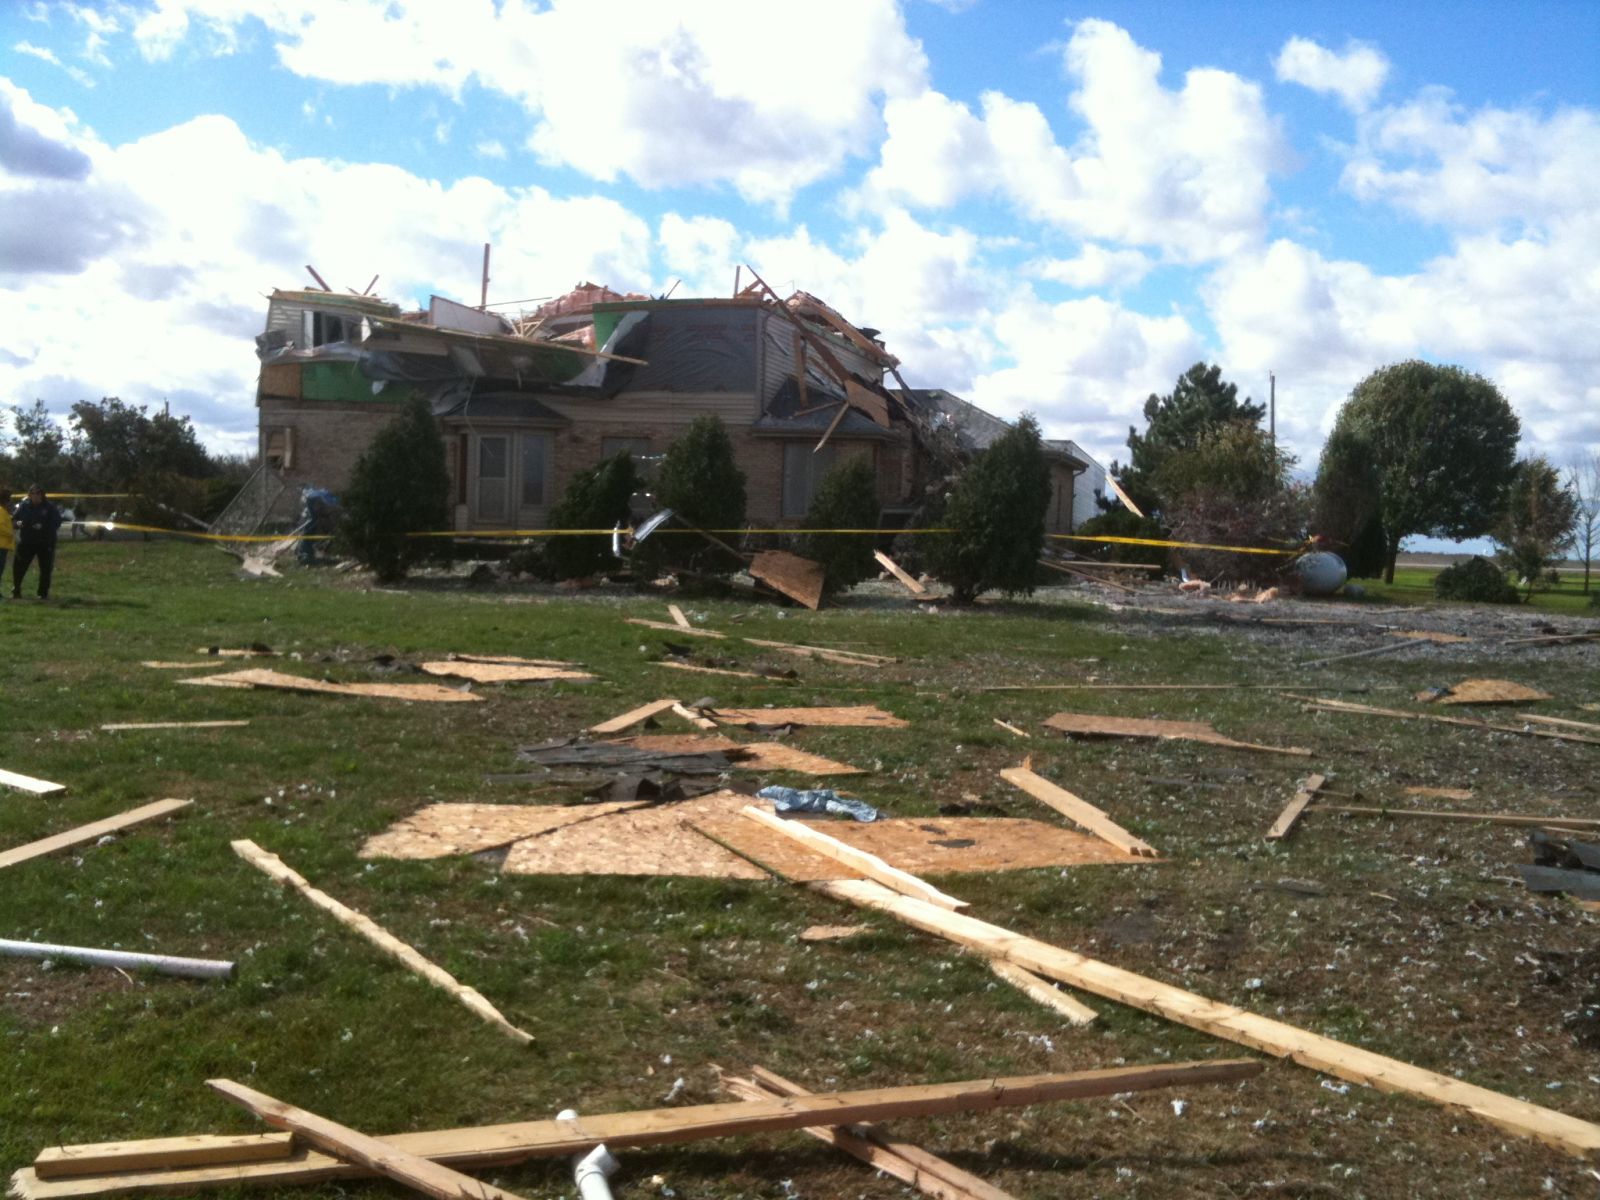 October 26, 2010, Tornadoes and StraightLine Winds